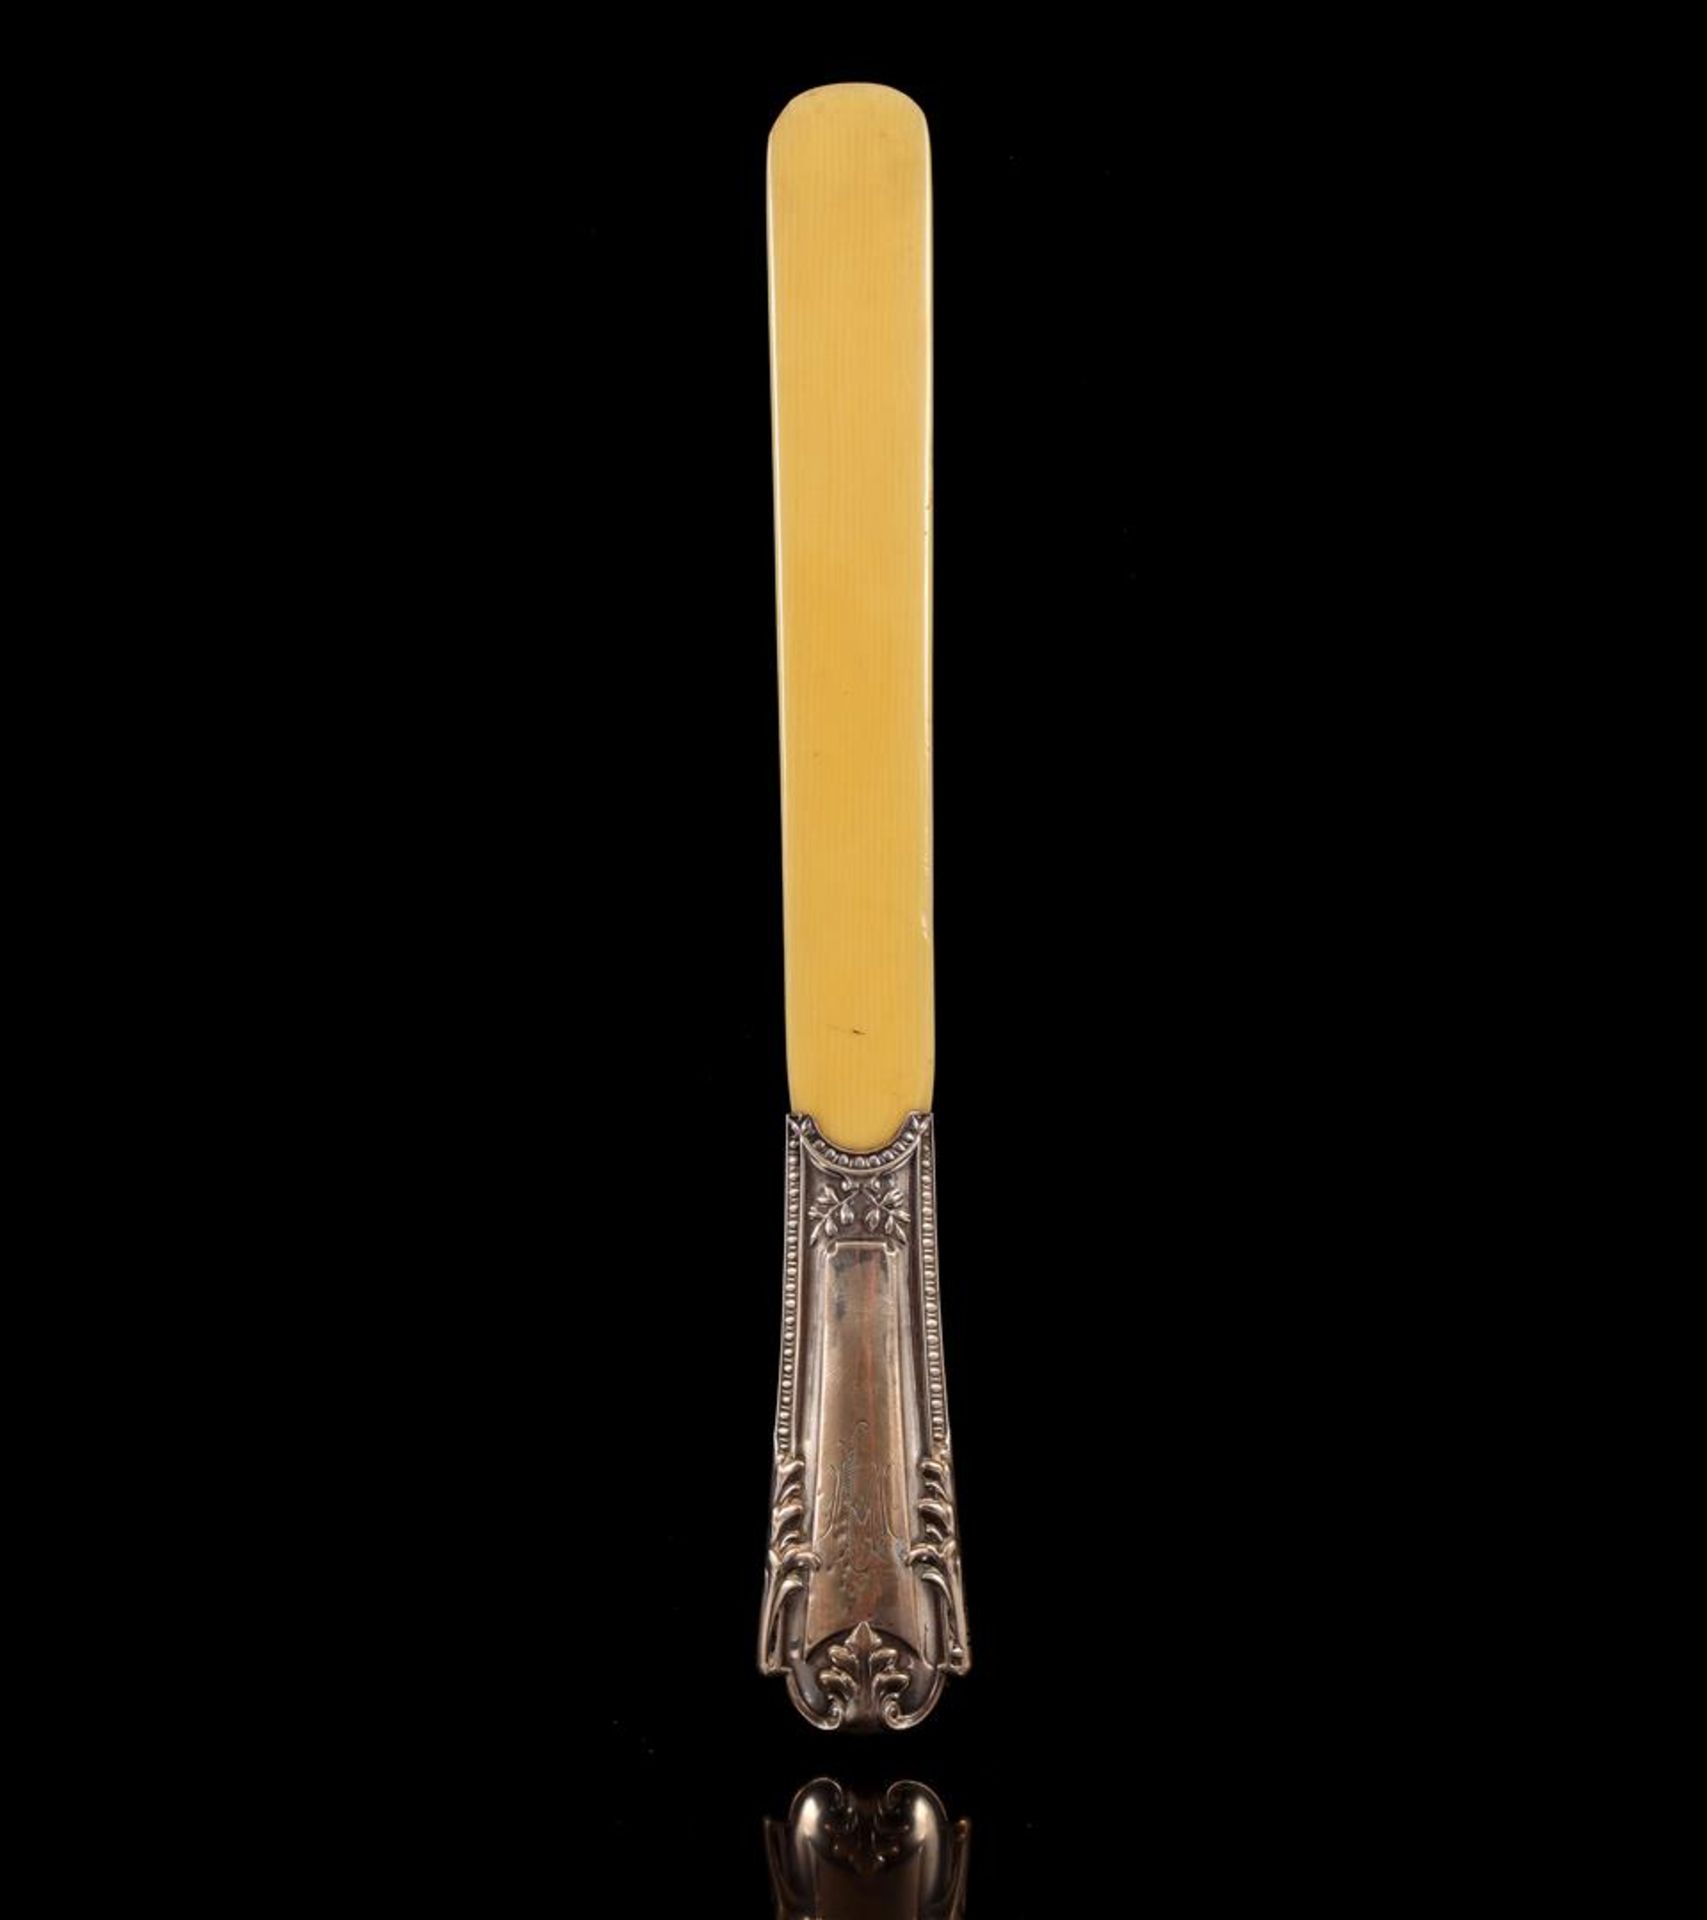 Ivory spatula / page turner with beautiful frame